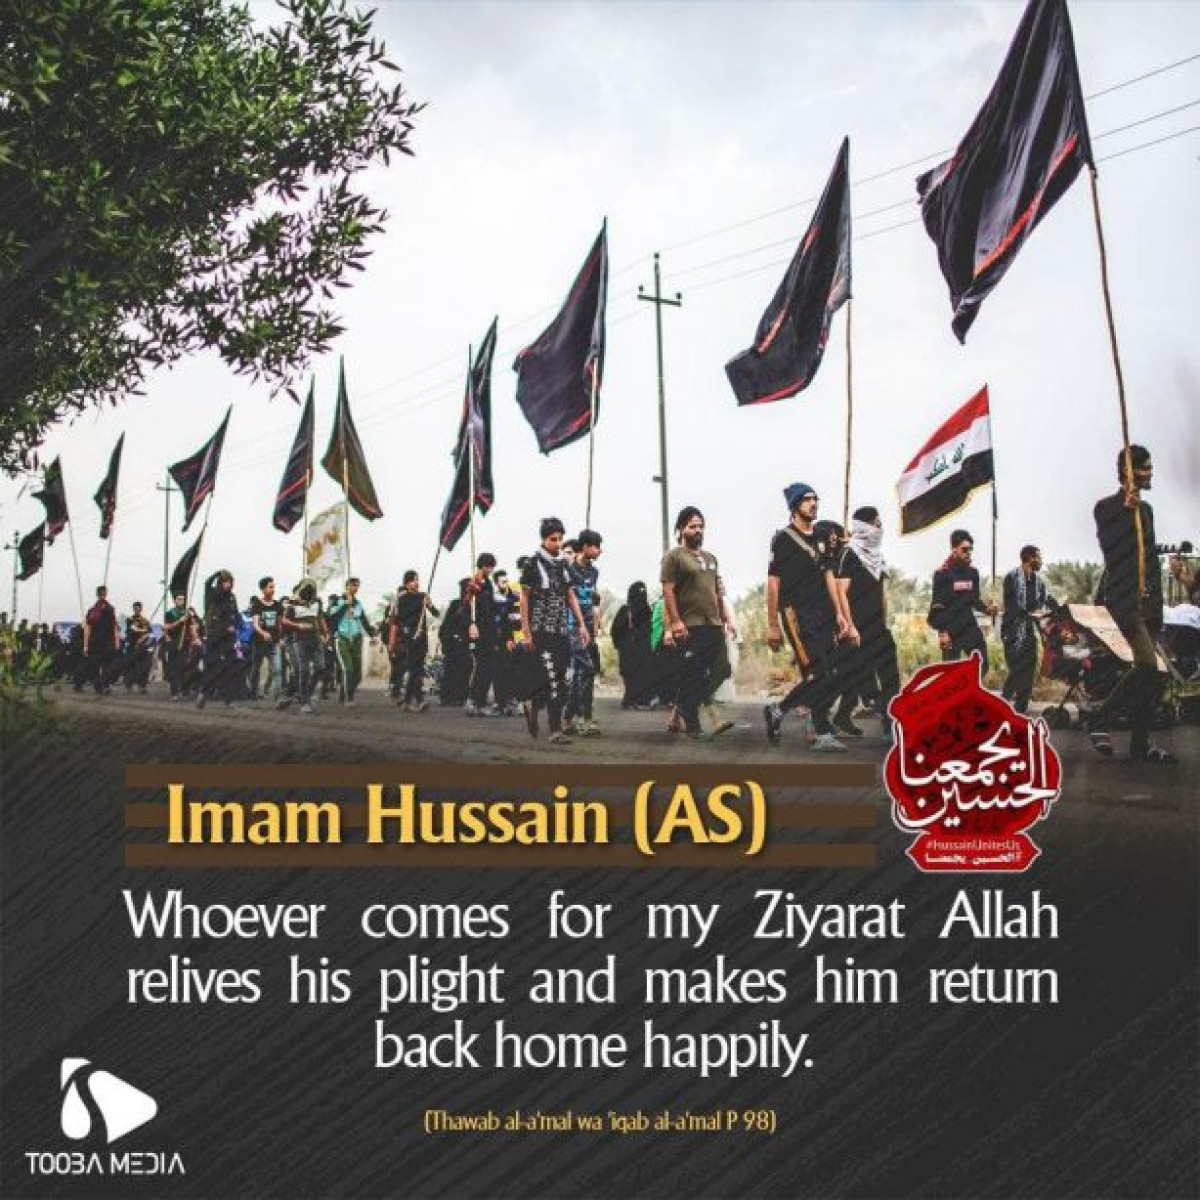 Whoever comes for my Ziarat, Allah relives his plight and makes him return back home happily